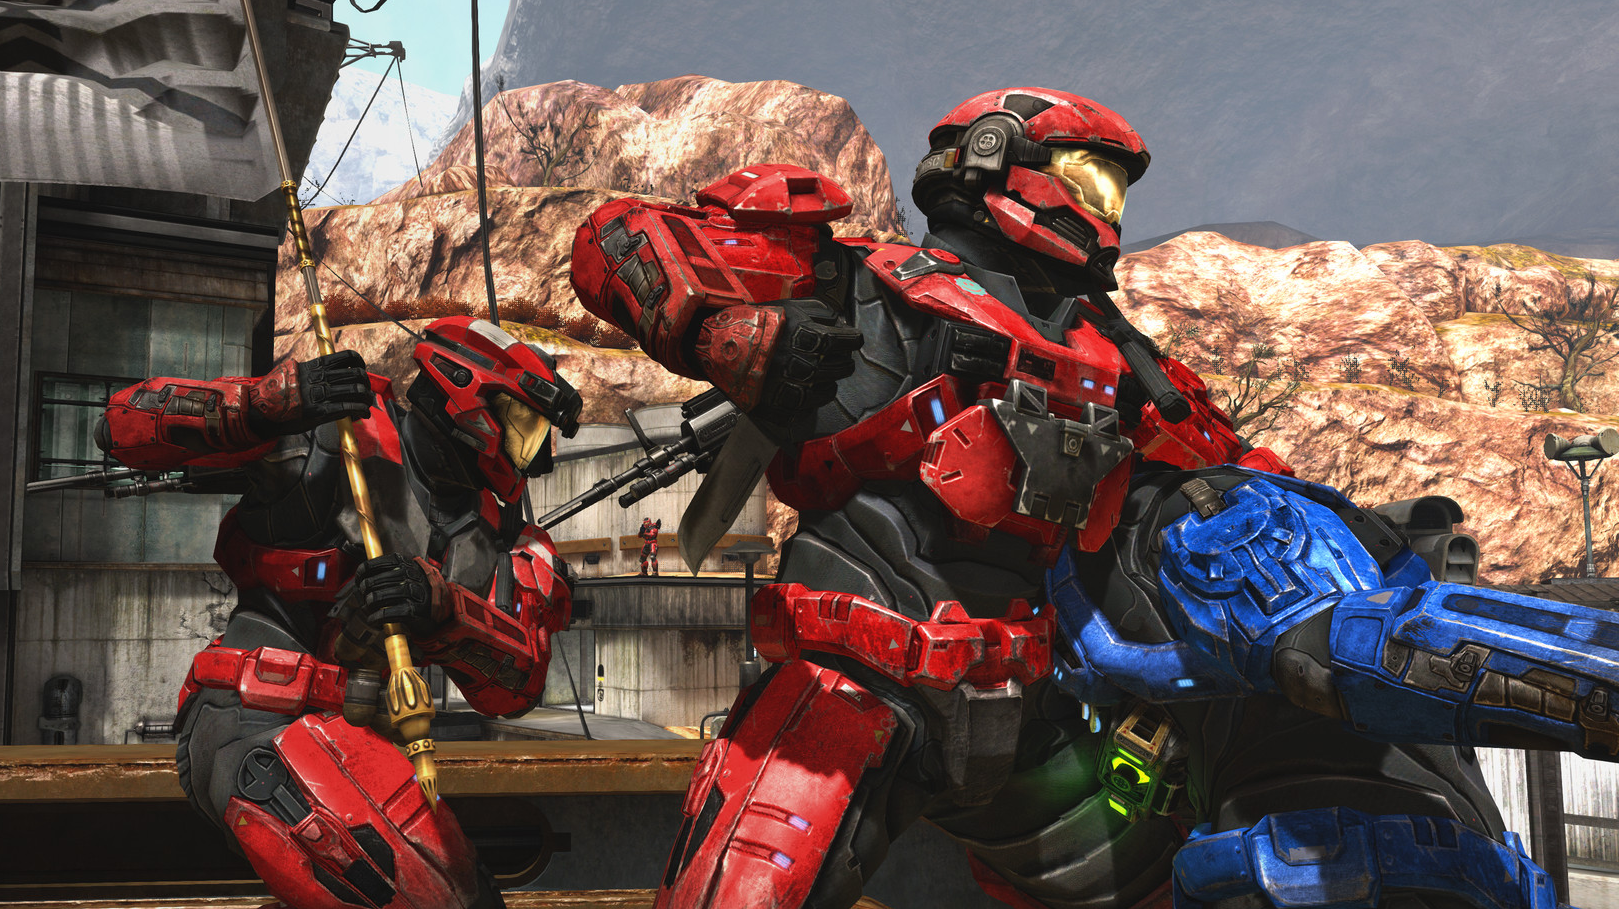 I’ve Had To Kick My Modern Habits To Stop Dying In Halo: Reach Multiplayer